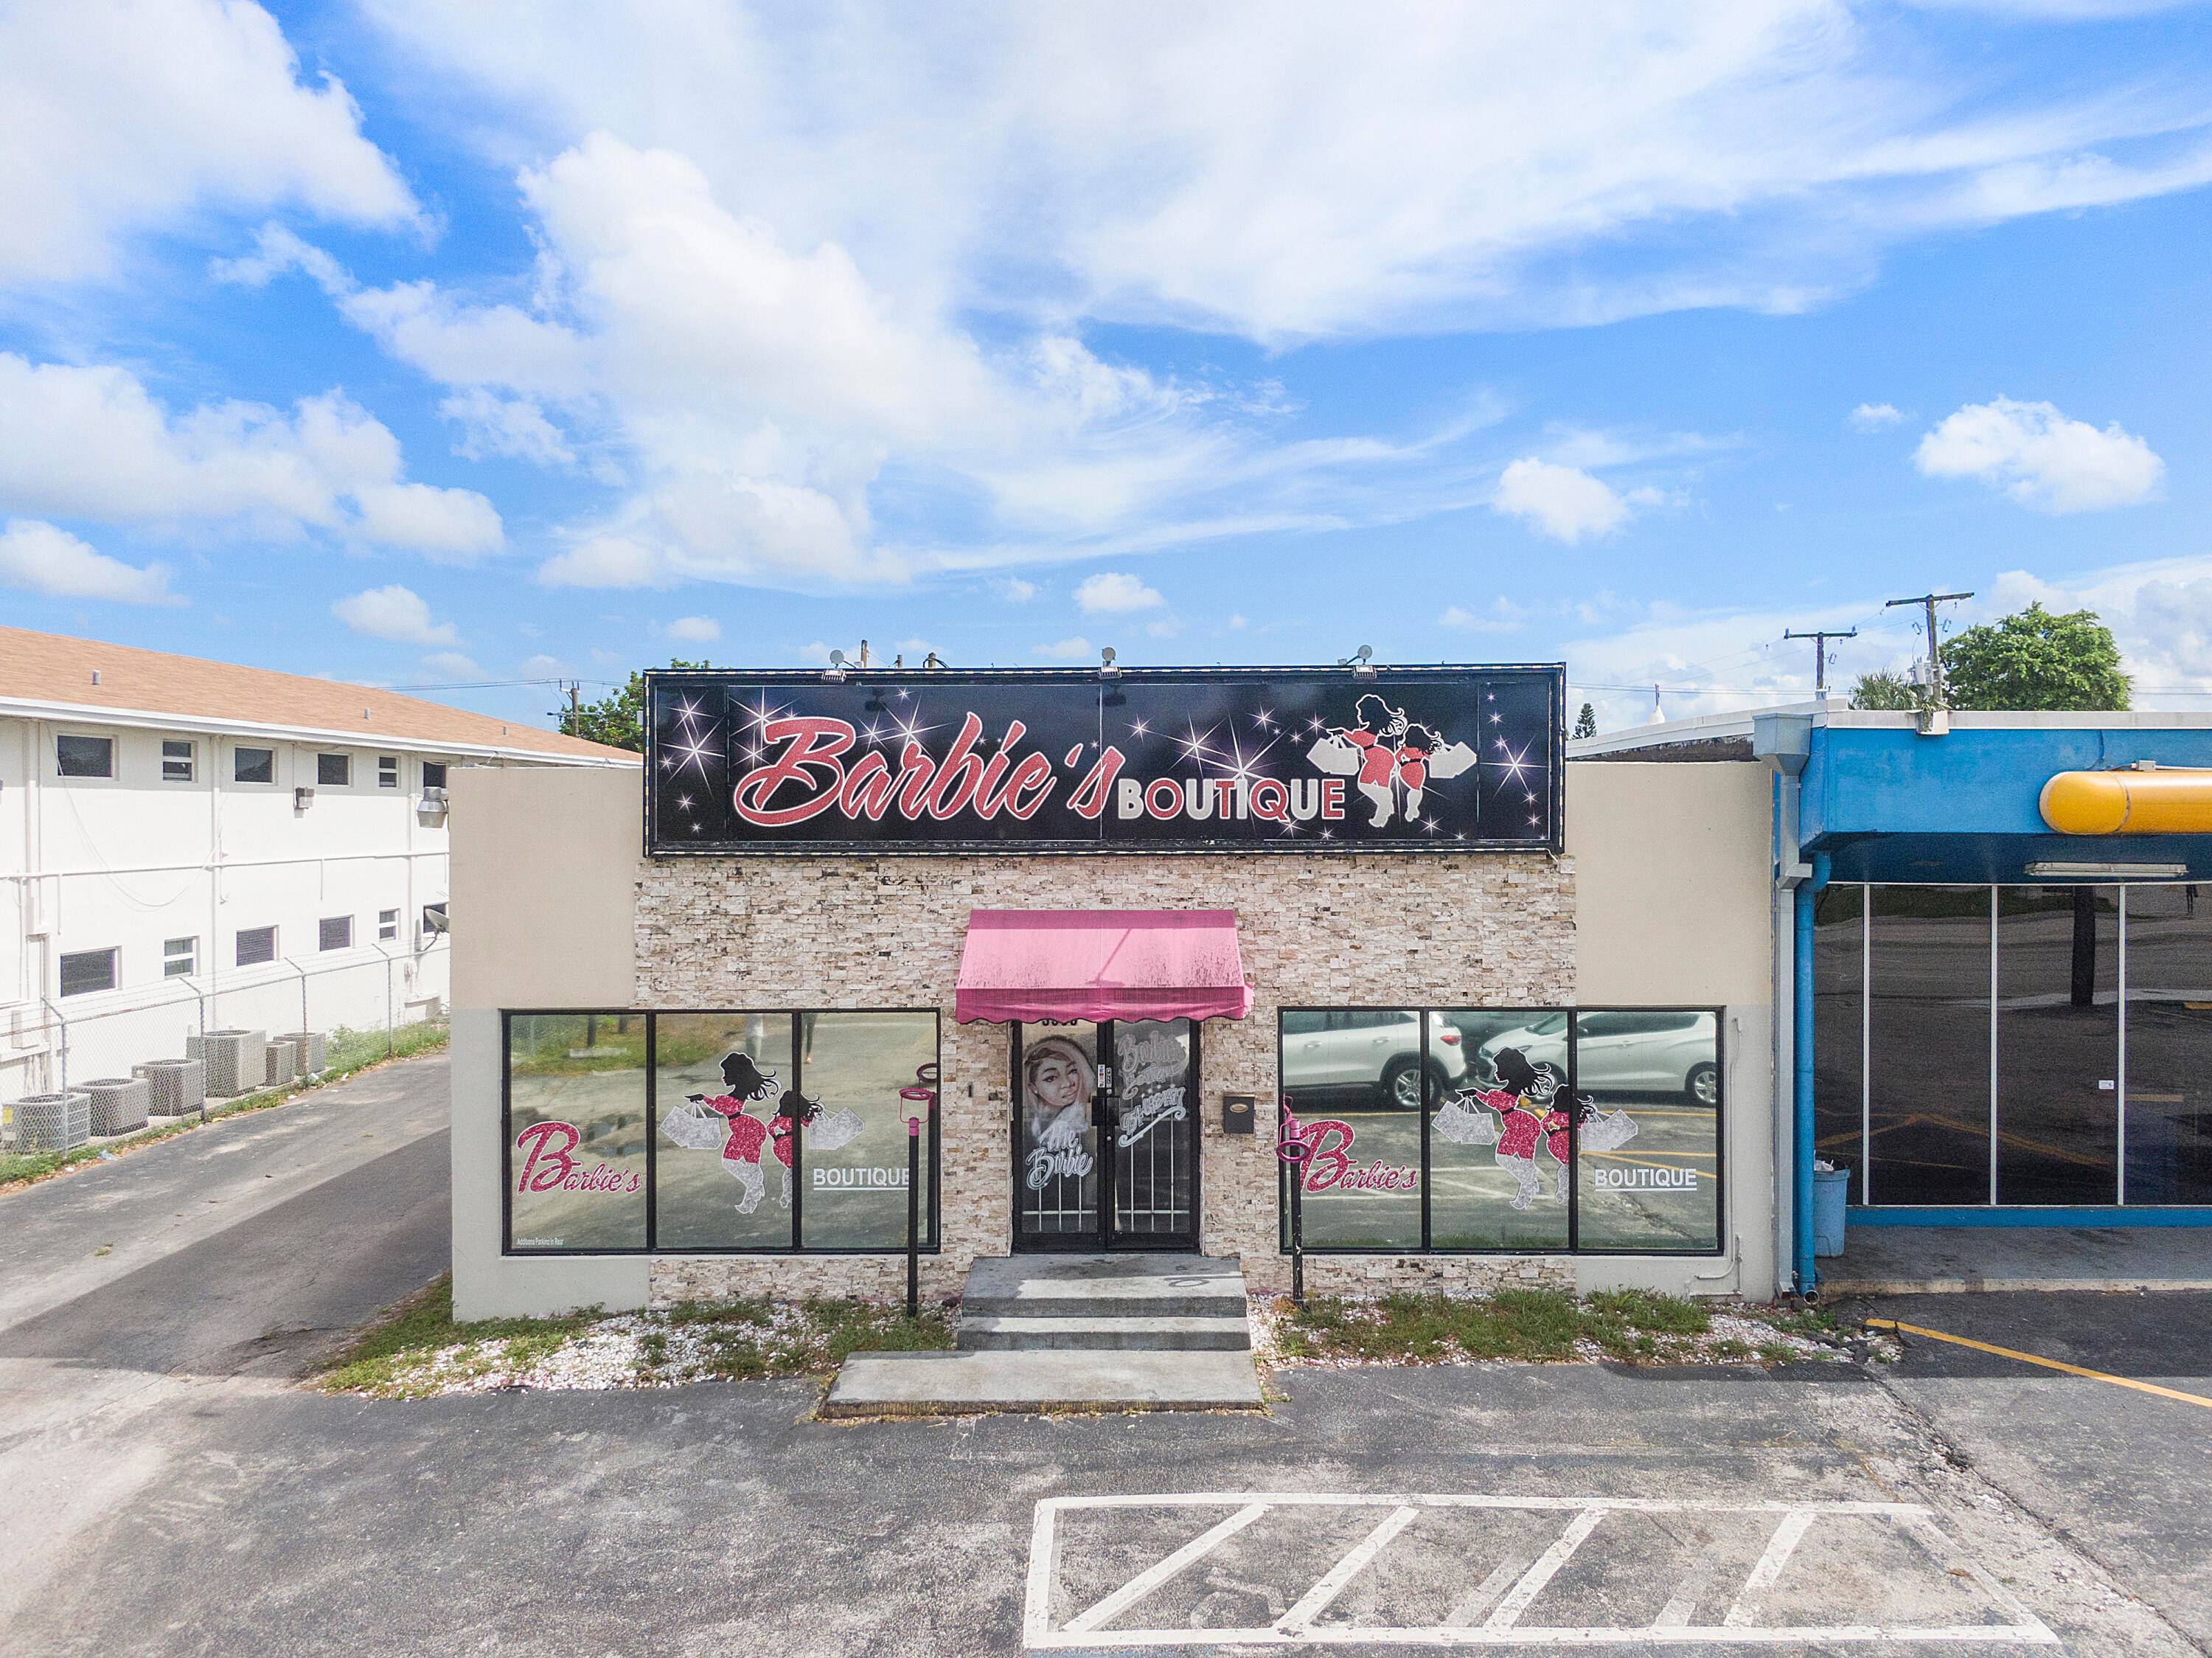 Freestanding retail building with great view of Broward Blvd.